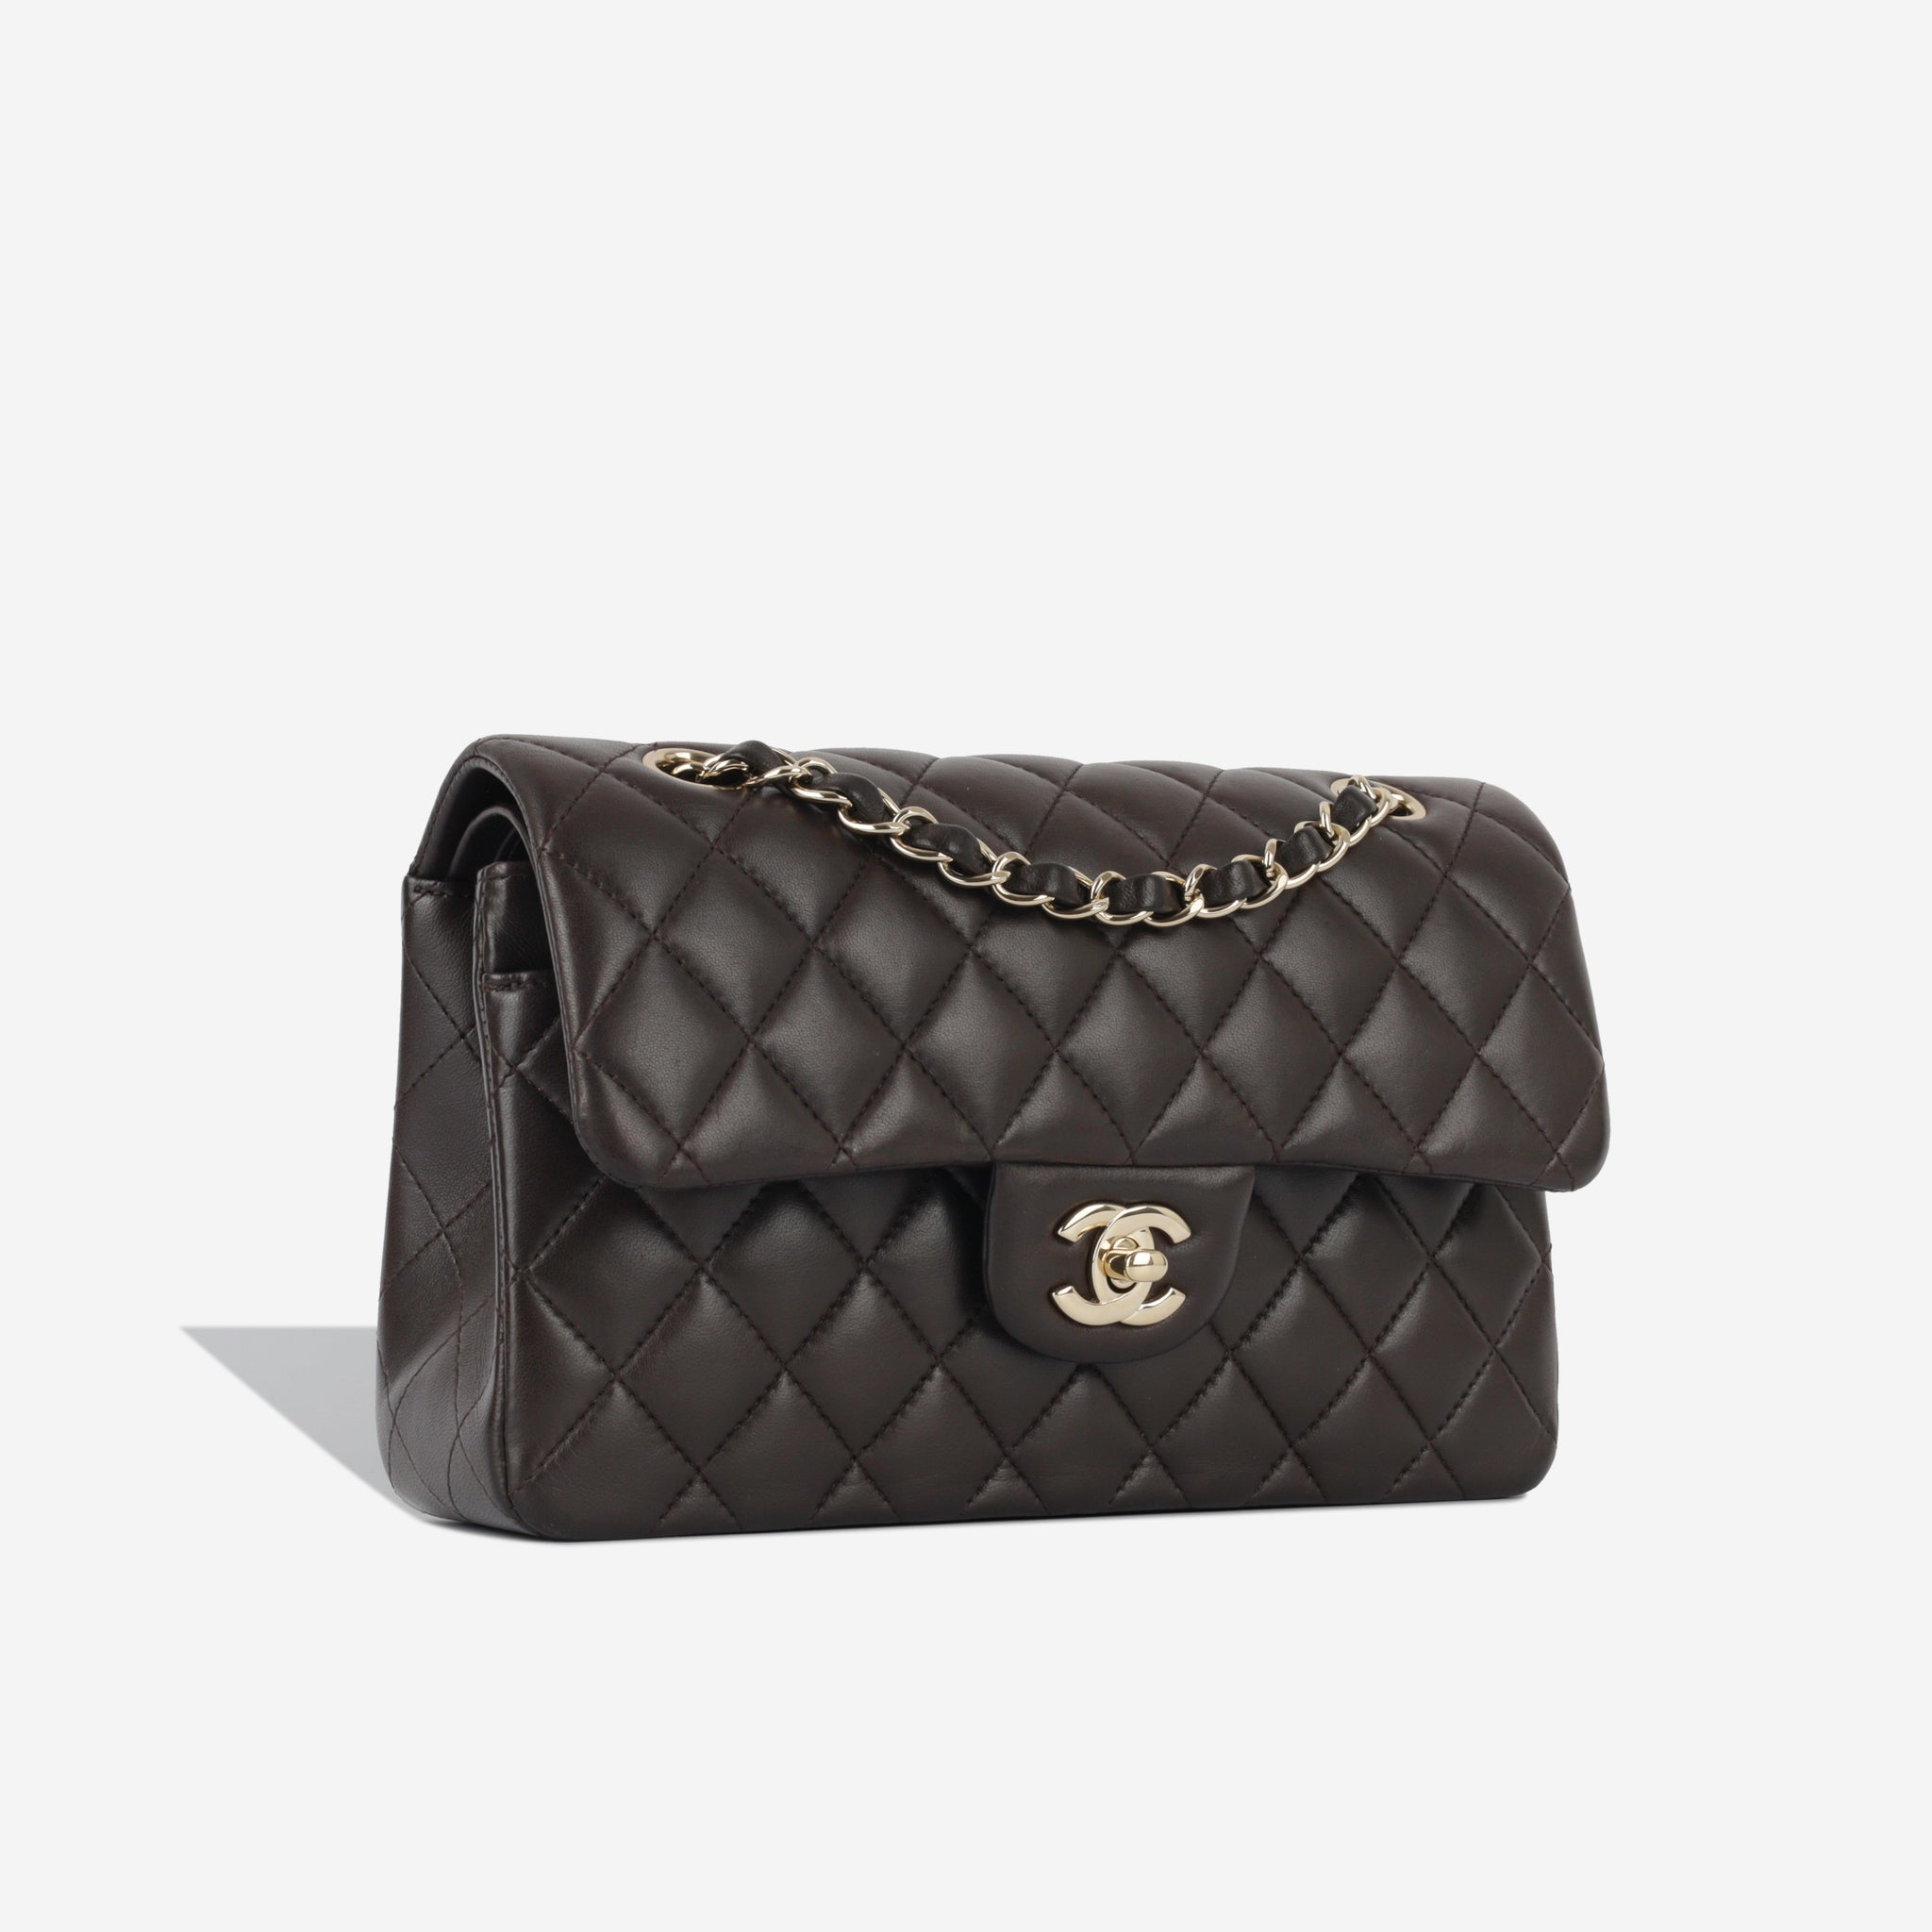 Chanel - Small Classic Flap Bag - Brown Lambskin CGHW - Excellent